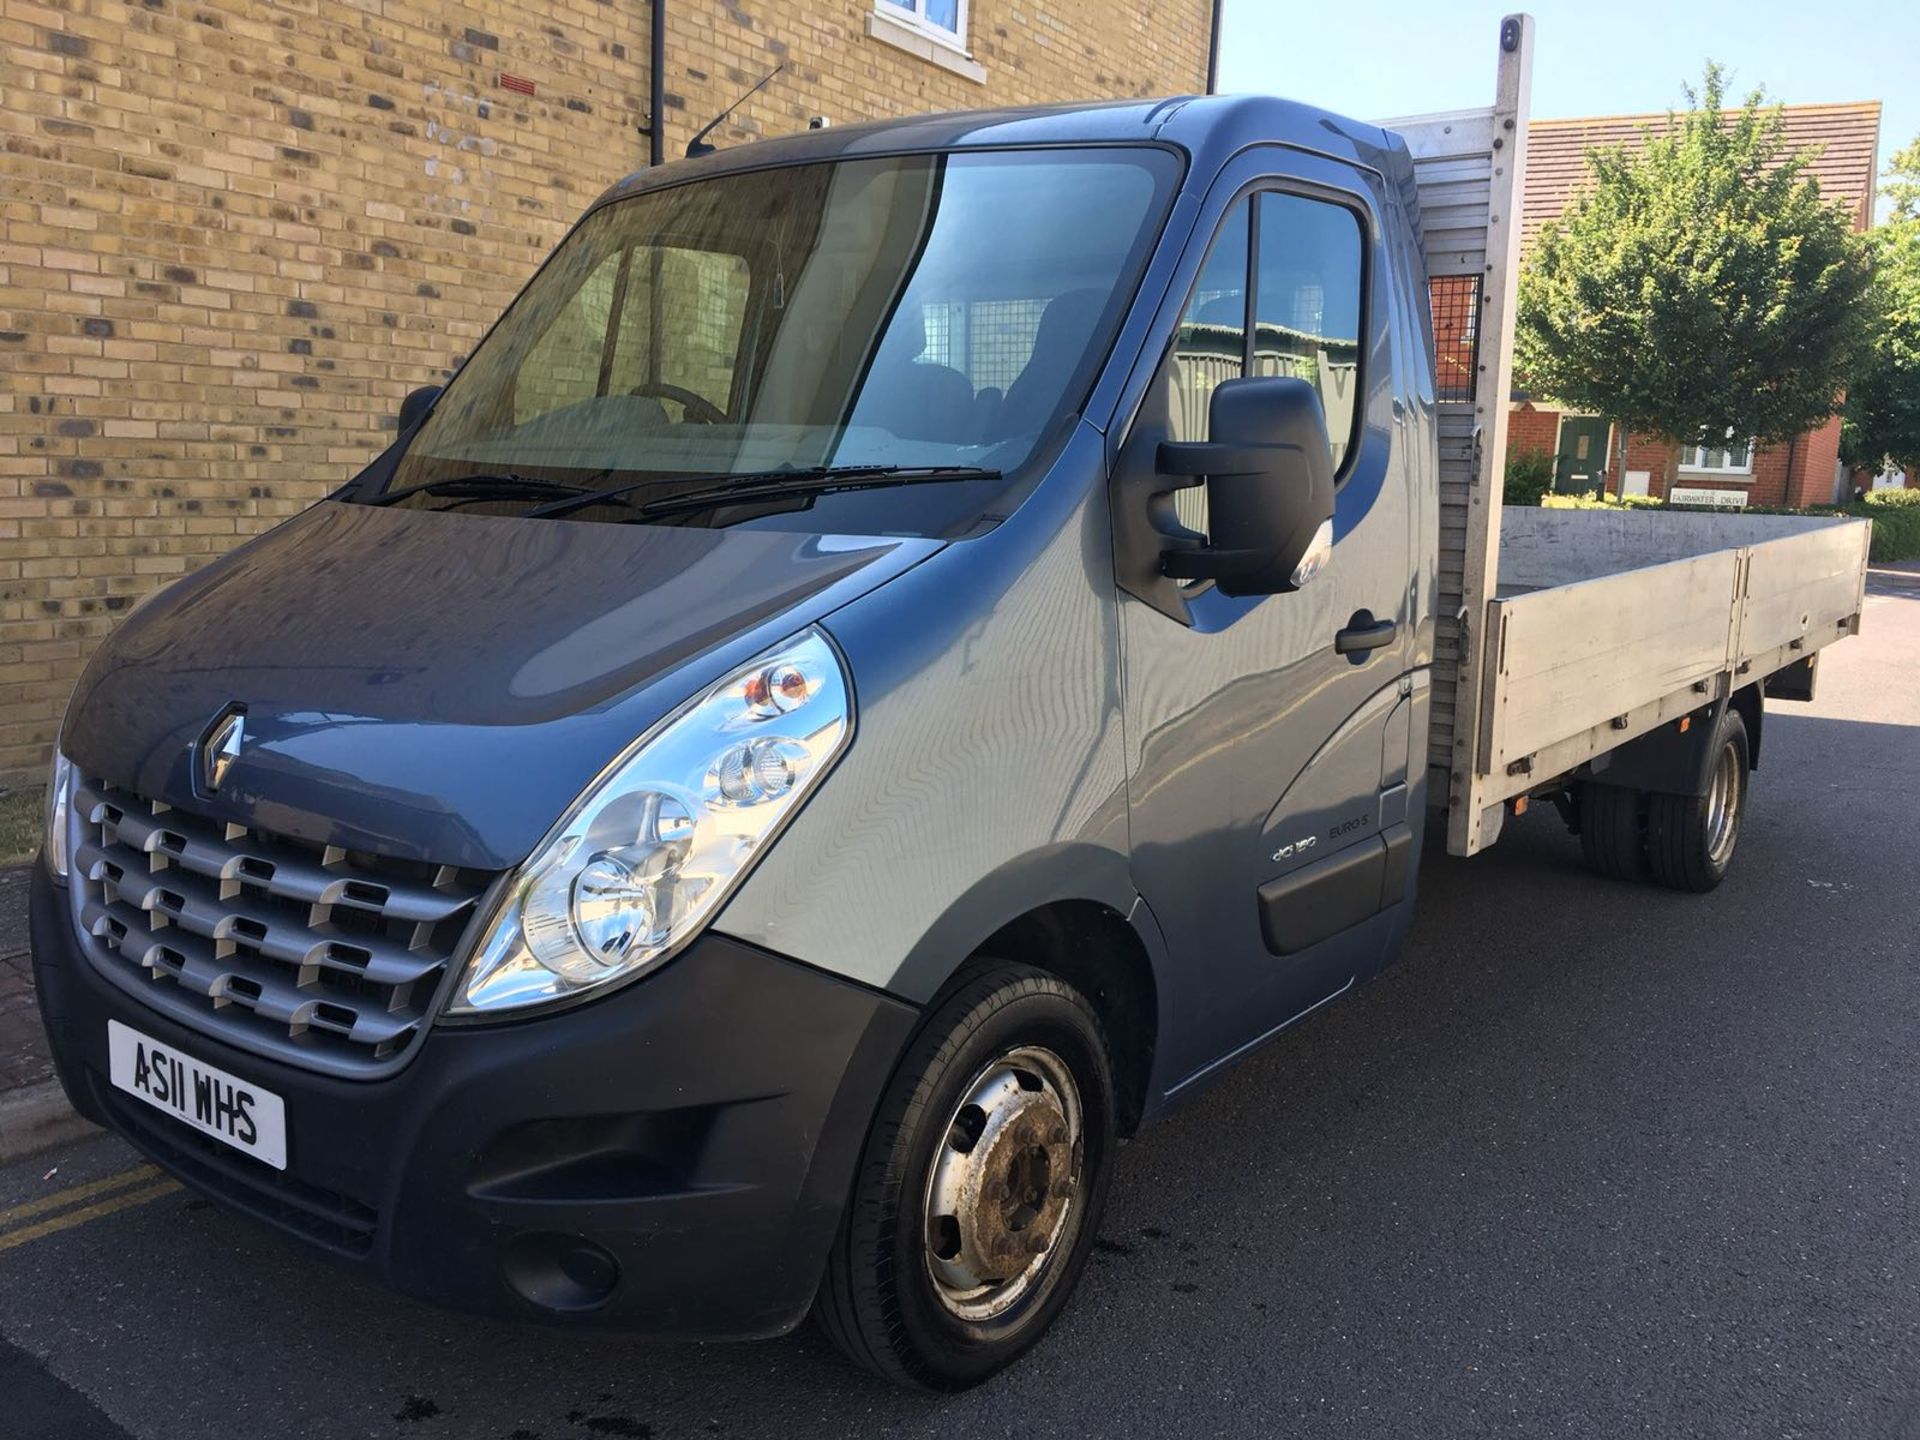 2012 RENAULT MASTER 2.3 DCI LL35 DROPSIDE PICKUP 3.5 TON GROSS TWIN WHEEL. 137,000 MILES. - Image 4 of 26